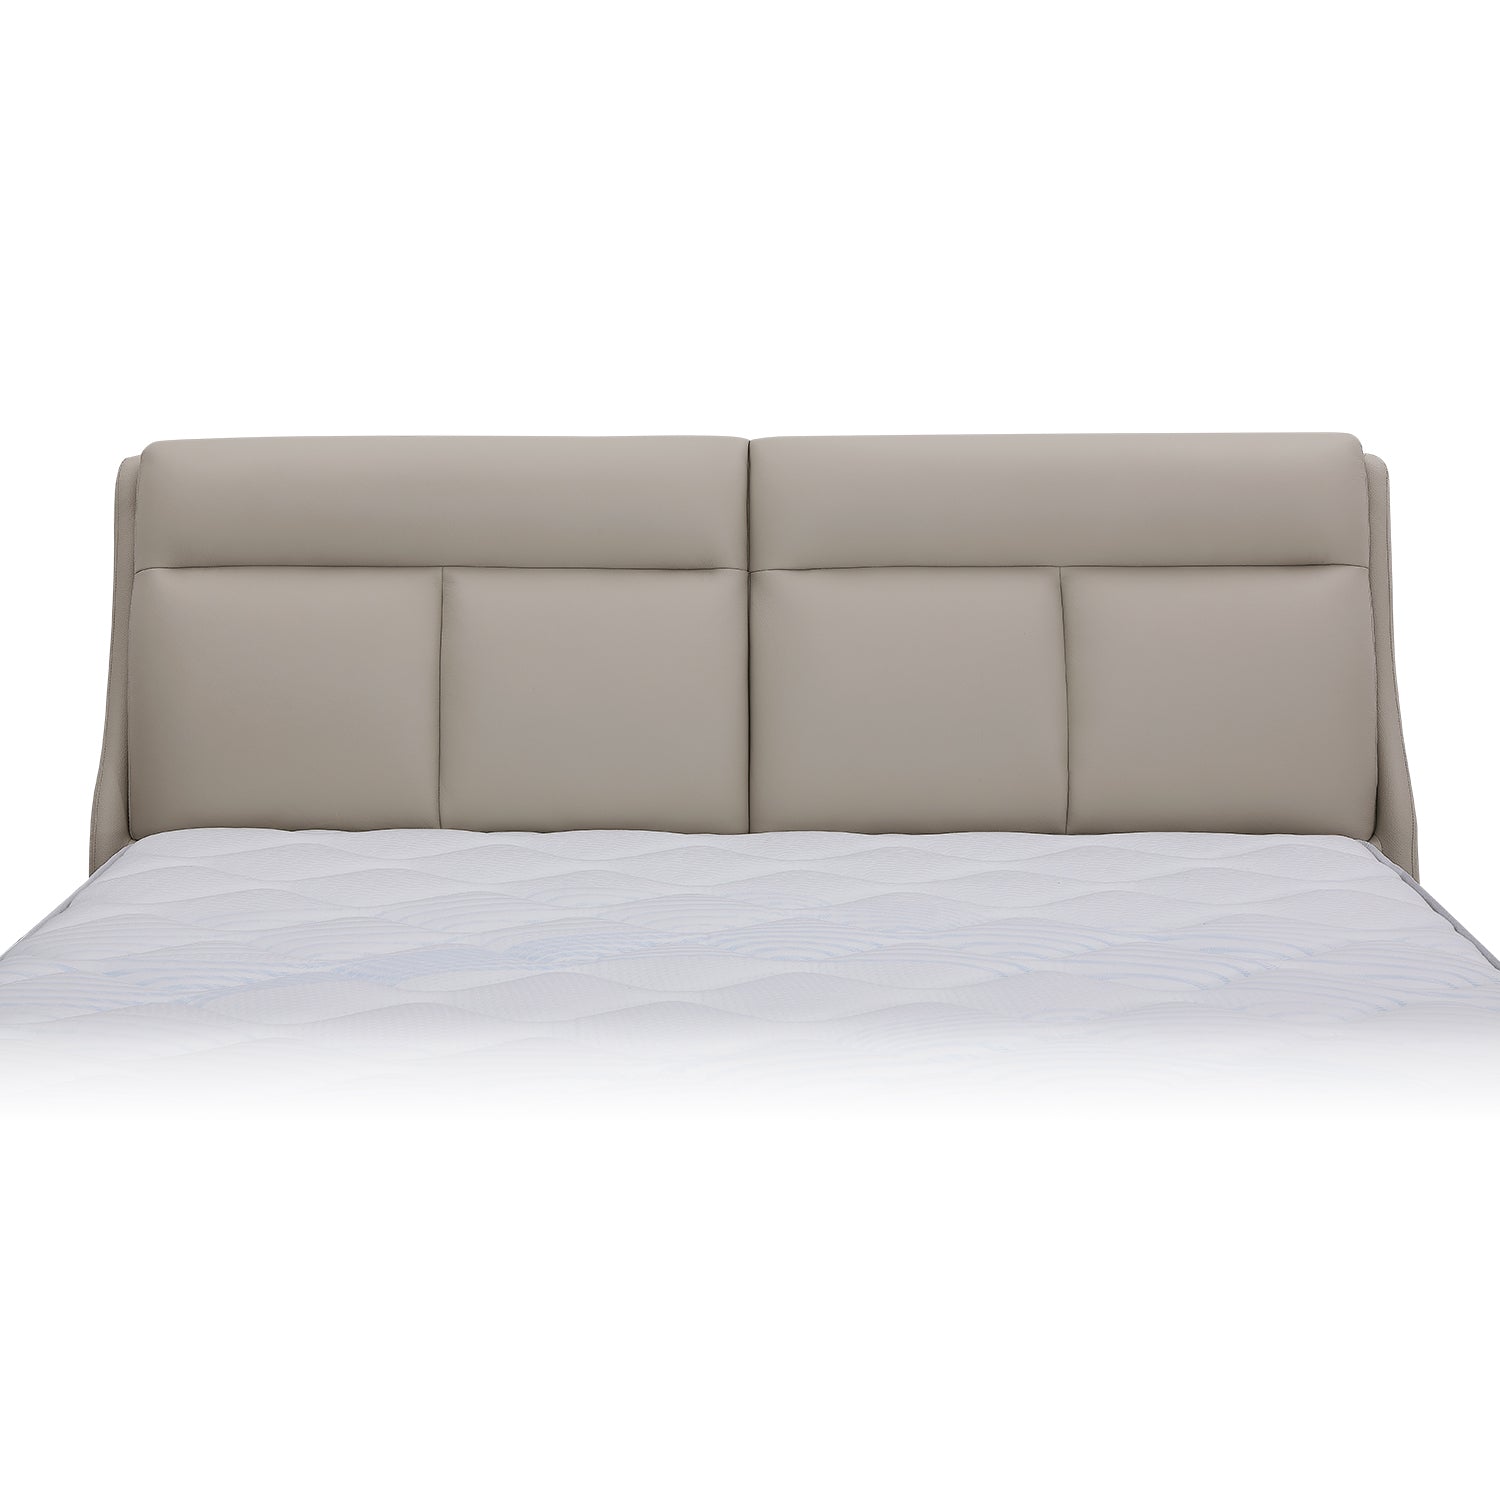 Beige leather bed frame with padded headboard and modern geometric design from DeRUCCI Bed Frame BOC1 - 002 collection.